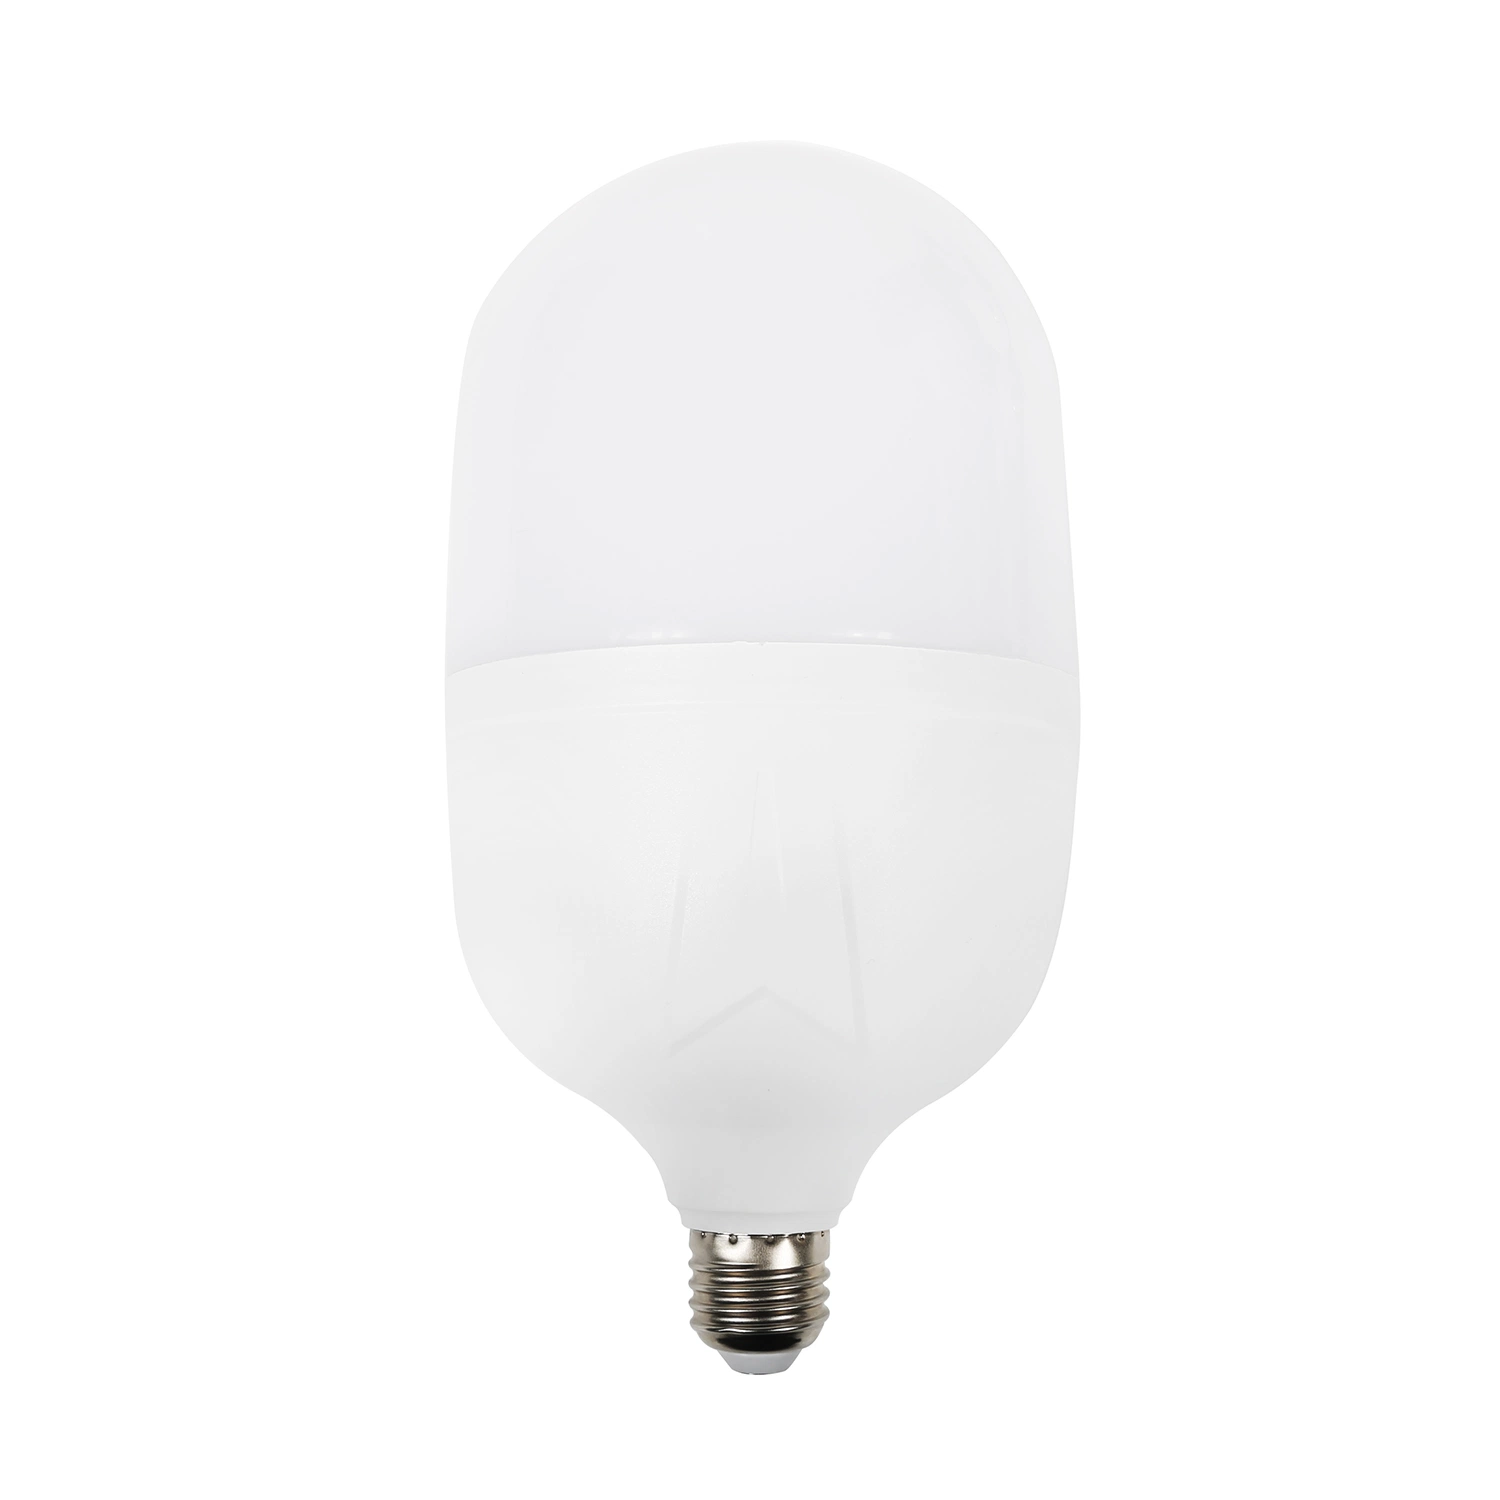 Home Dekoration Farbe 30W 40W High Power LED-Lampe Beleuchtung LED-Glühlampe